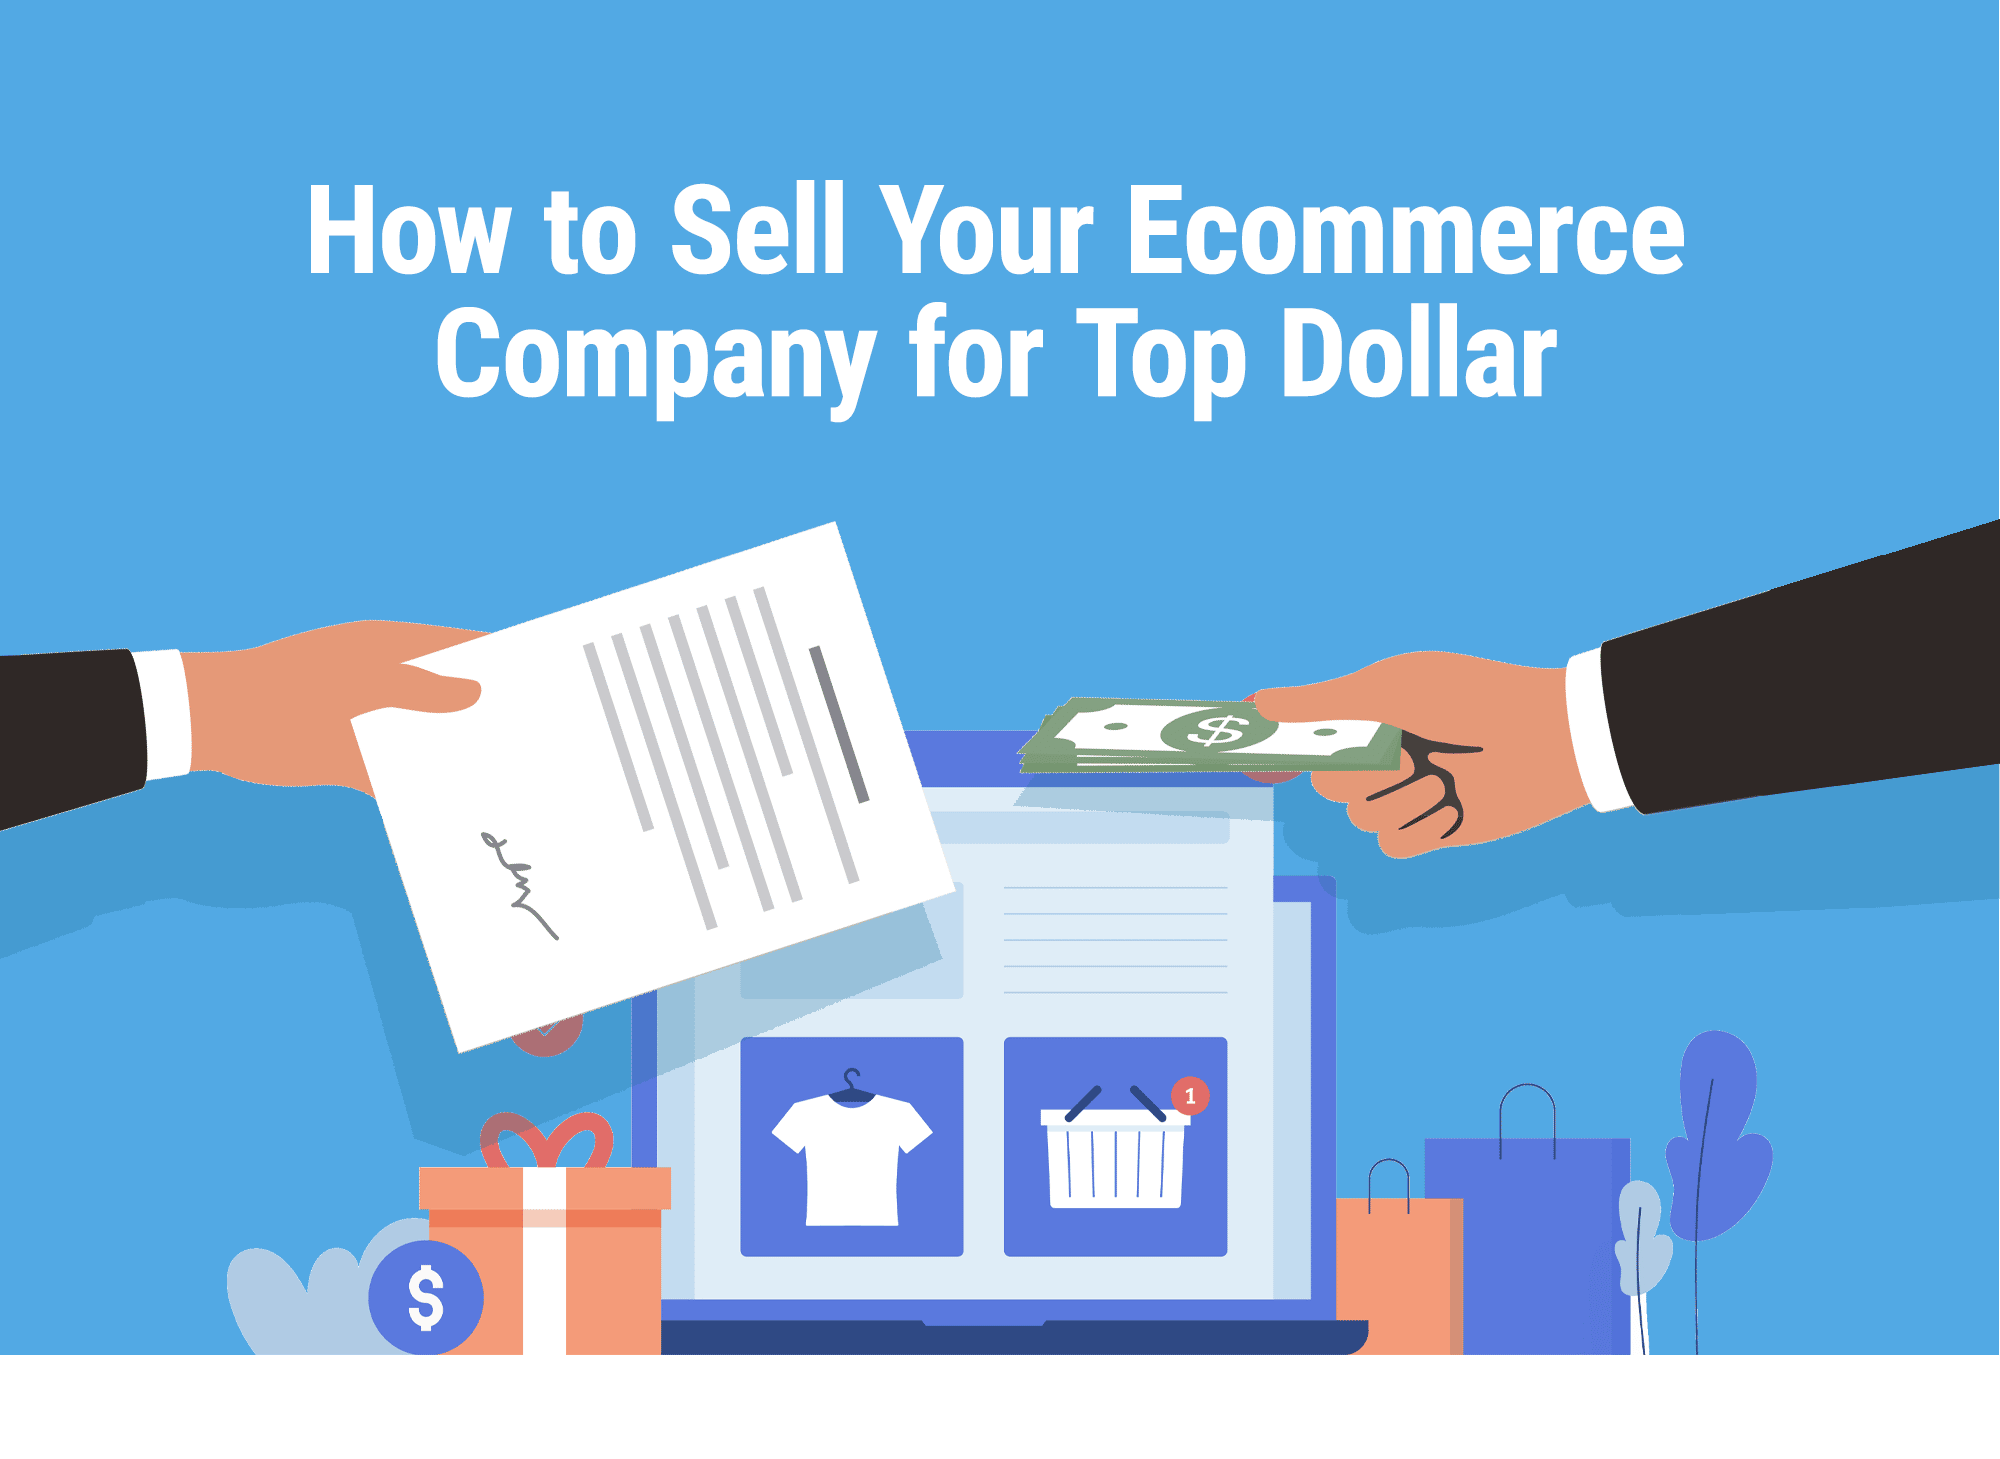 How to Sell Your Ecommerce Business for Top Dollar